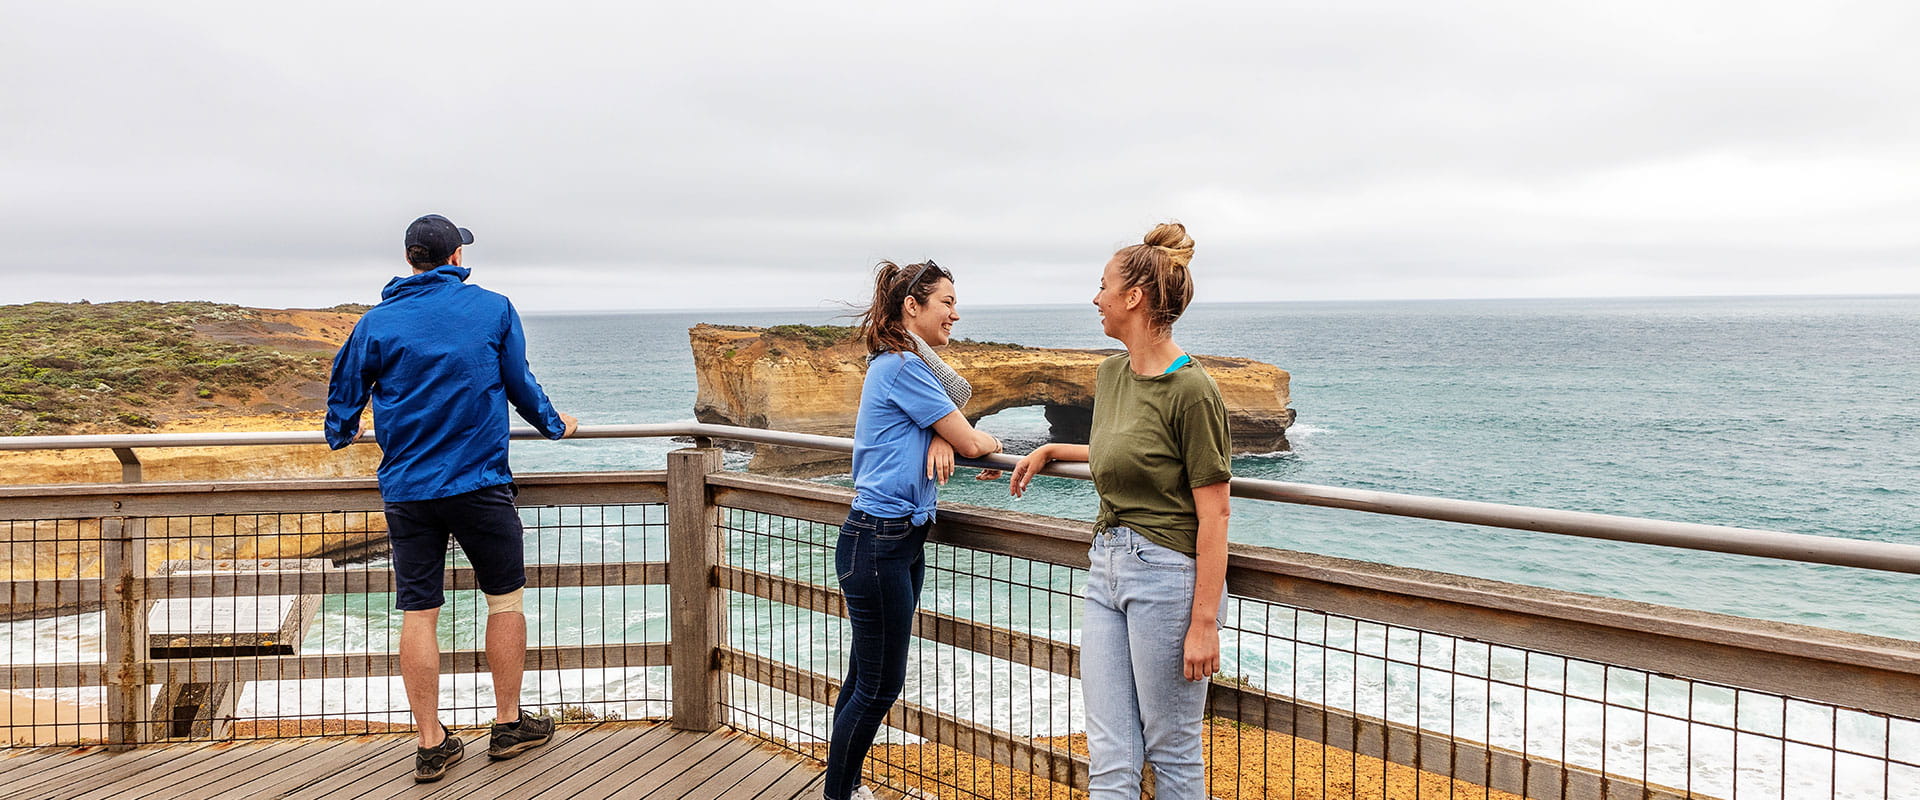 Two women chat at a coastal lookout in front of a sandstone rock stack resembling a bridge.